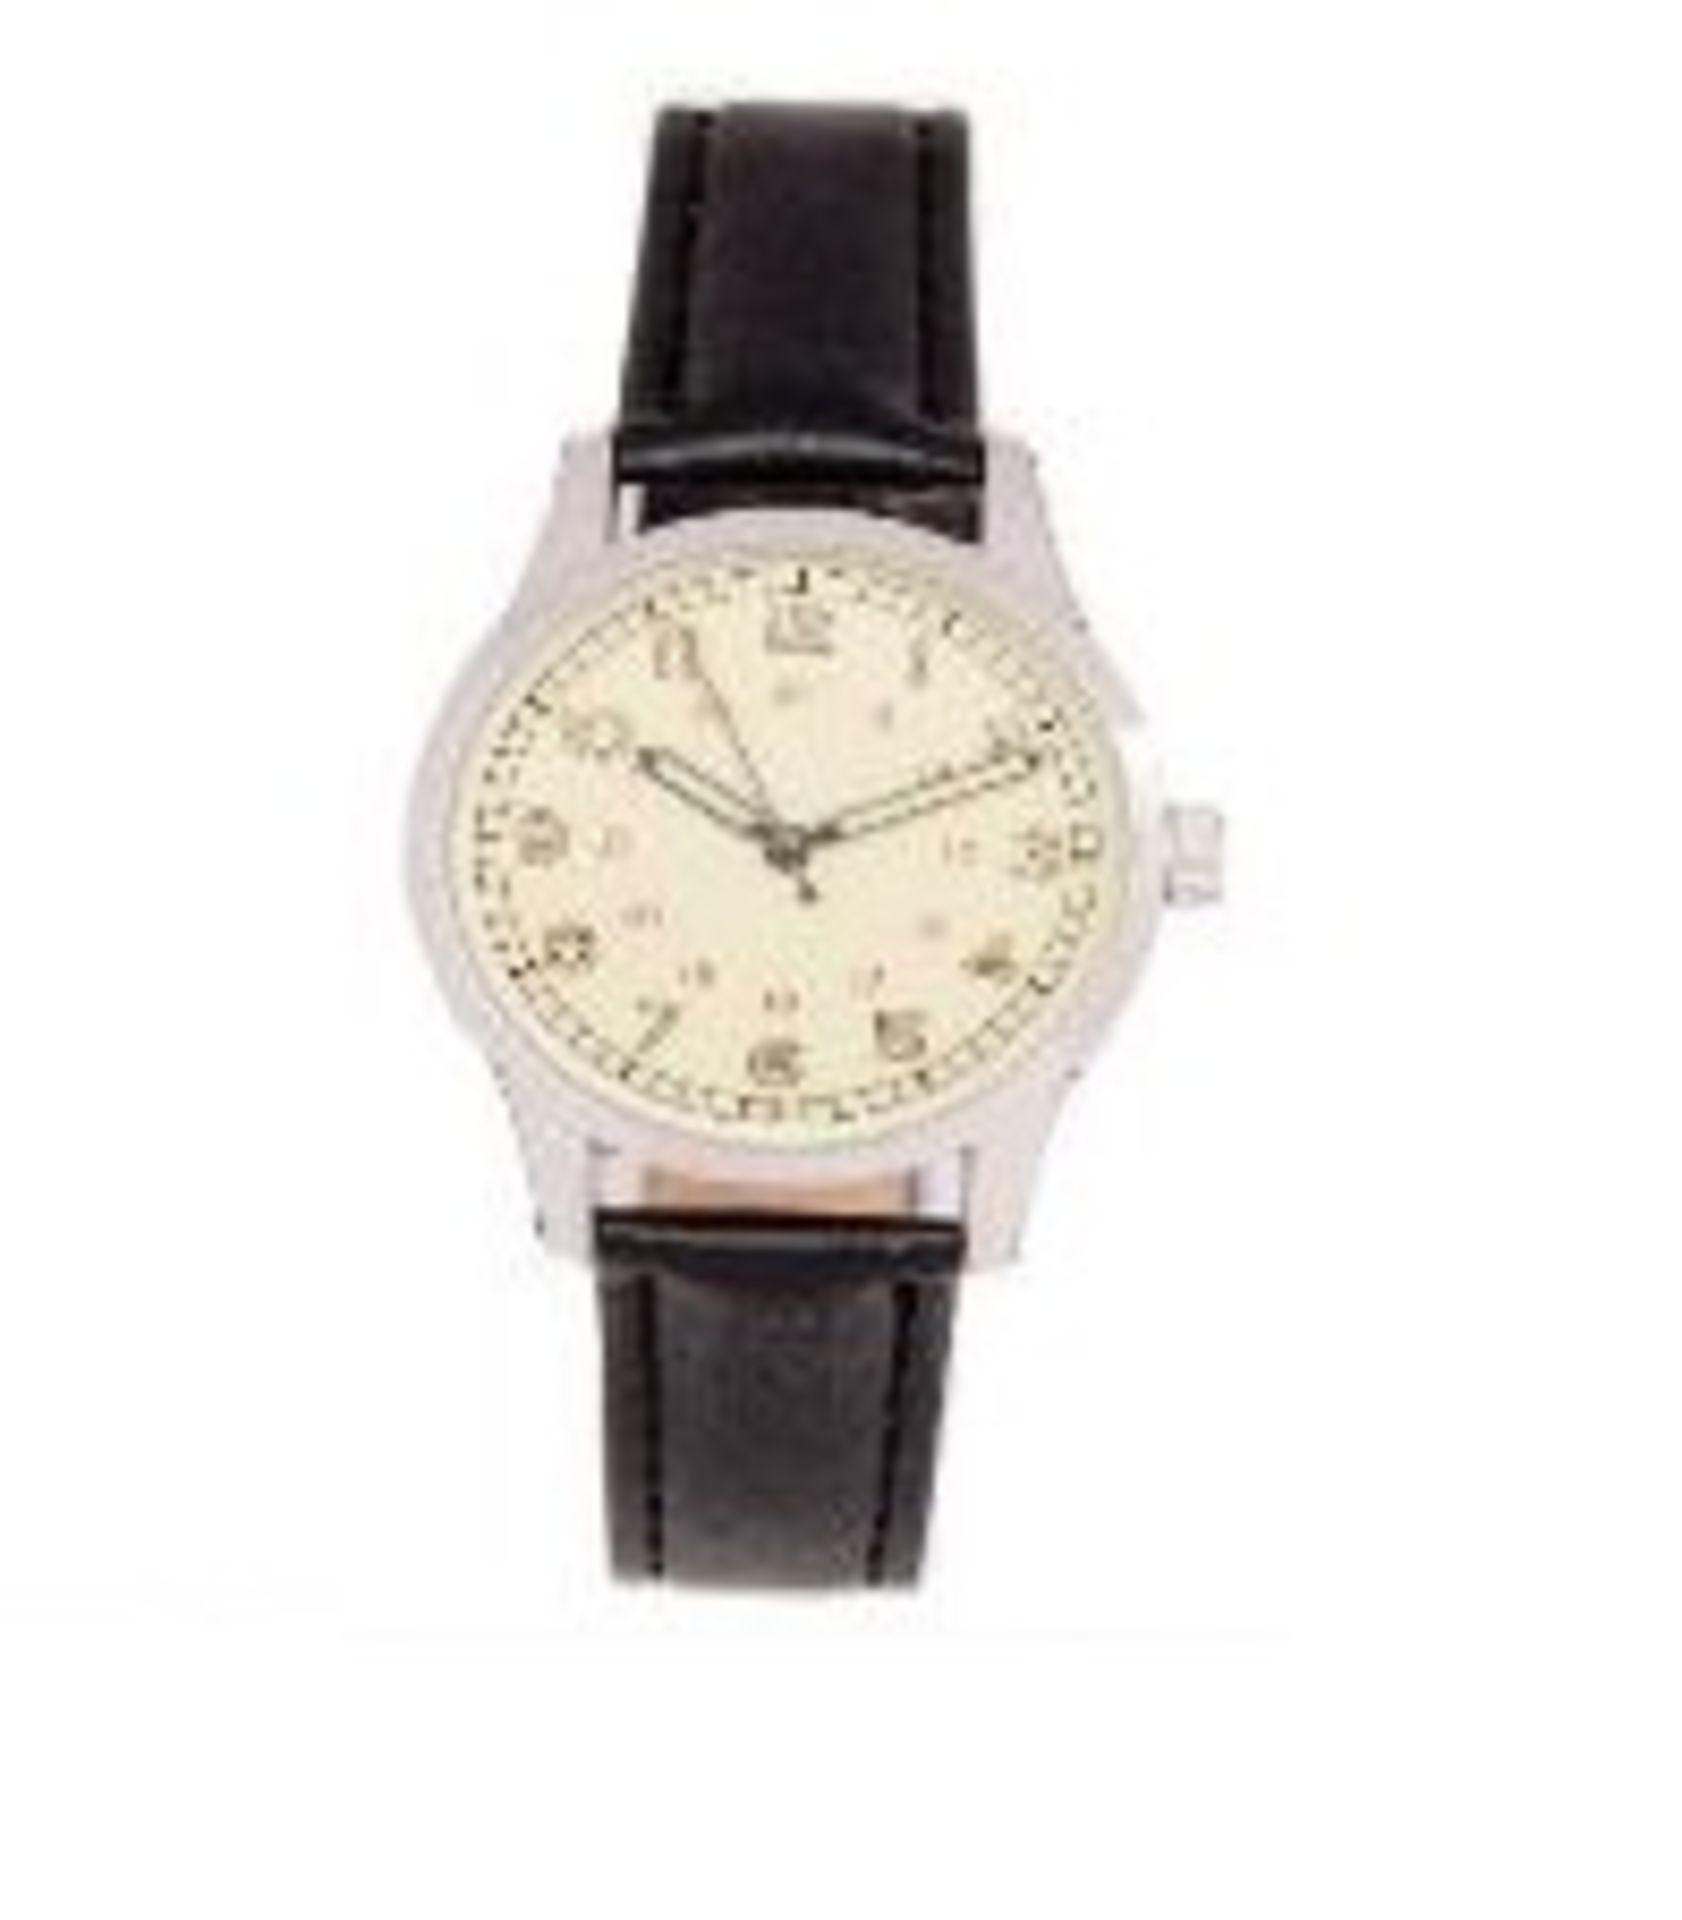 + VAT Brand New Gents 1940s American Seamans Watch With Engraved Back & Presentation Box